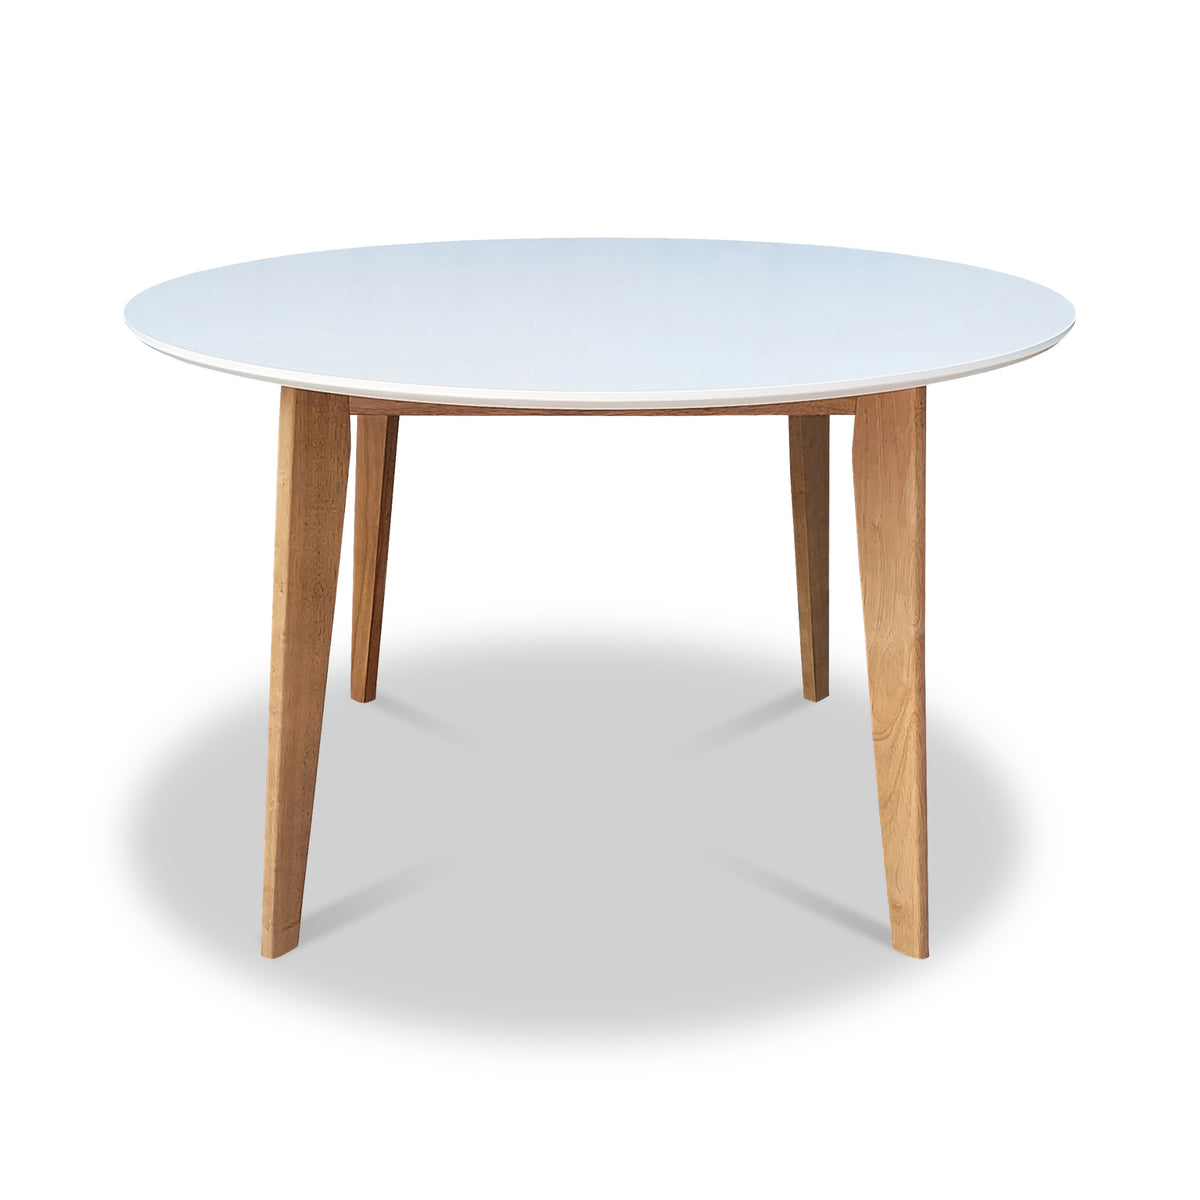 Remy White 120cm Round Dining Table from Roseland Furniture